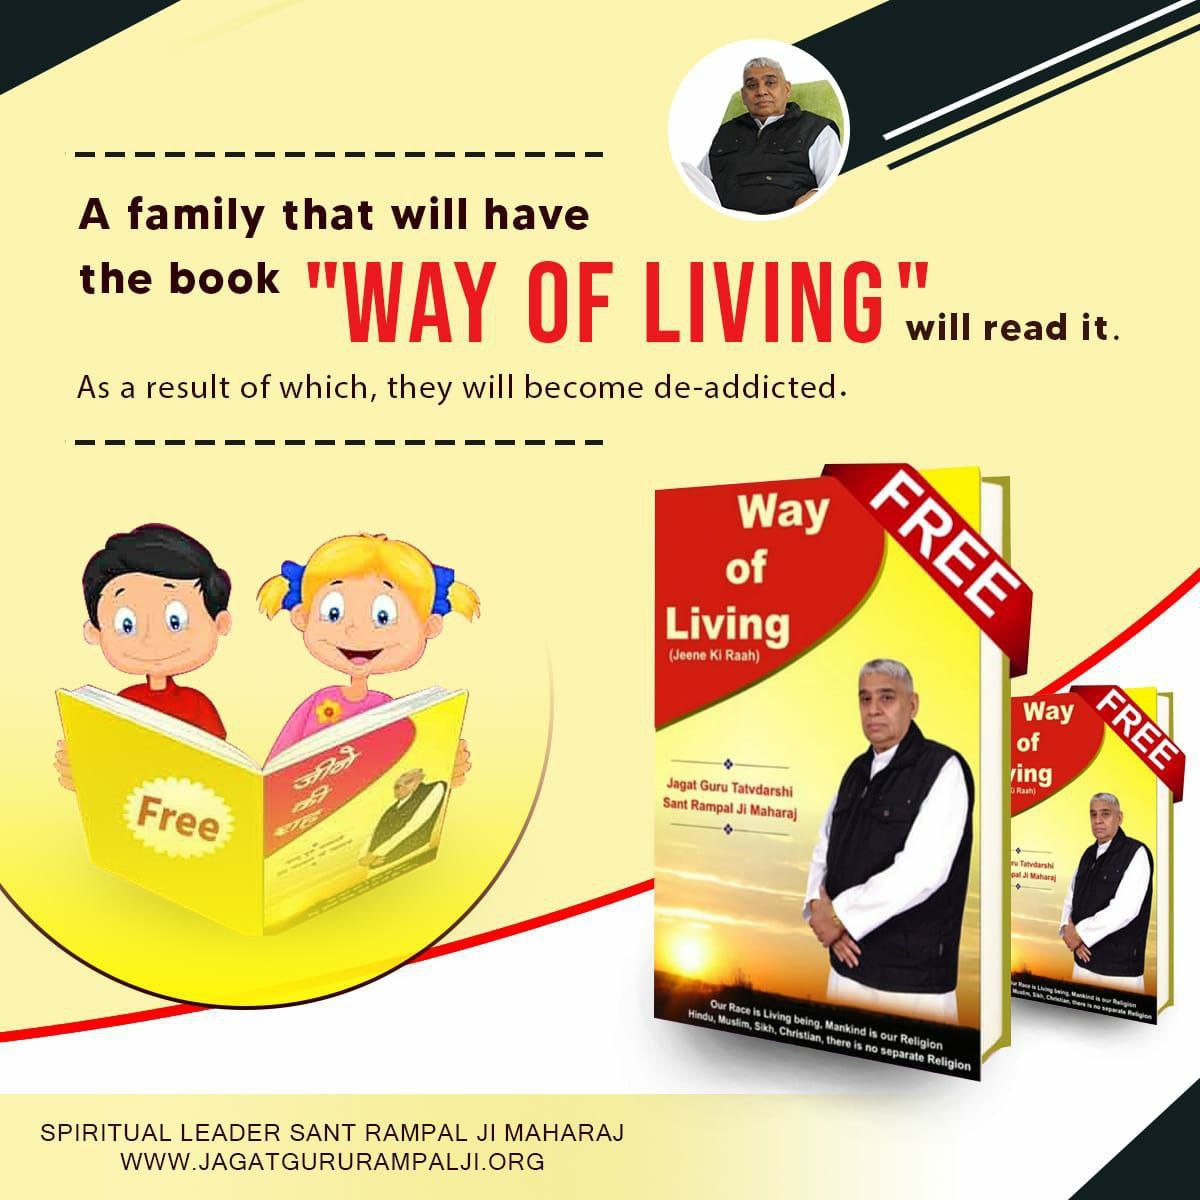 #GodMorningThursday The Book “Way of Living” is worthy of being kept in every home. By reading and following it, you will remain happy, both in this world and the other.